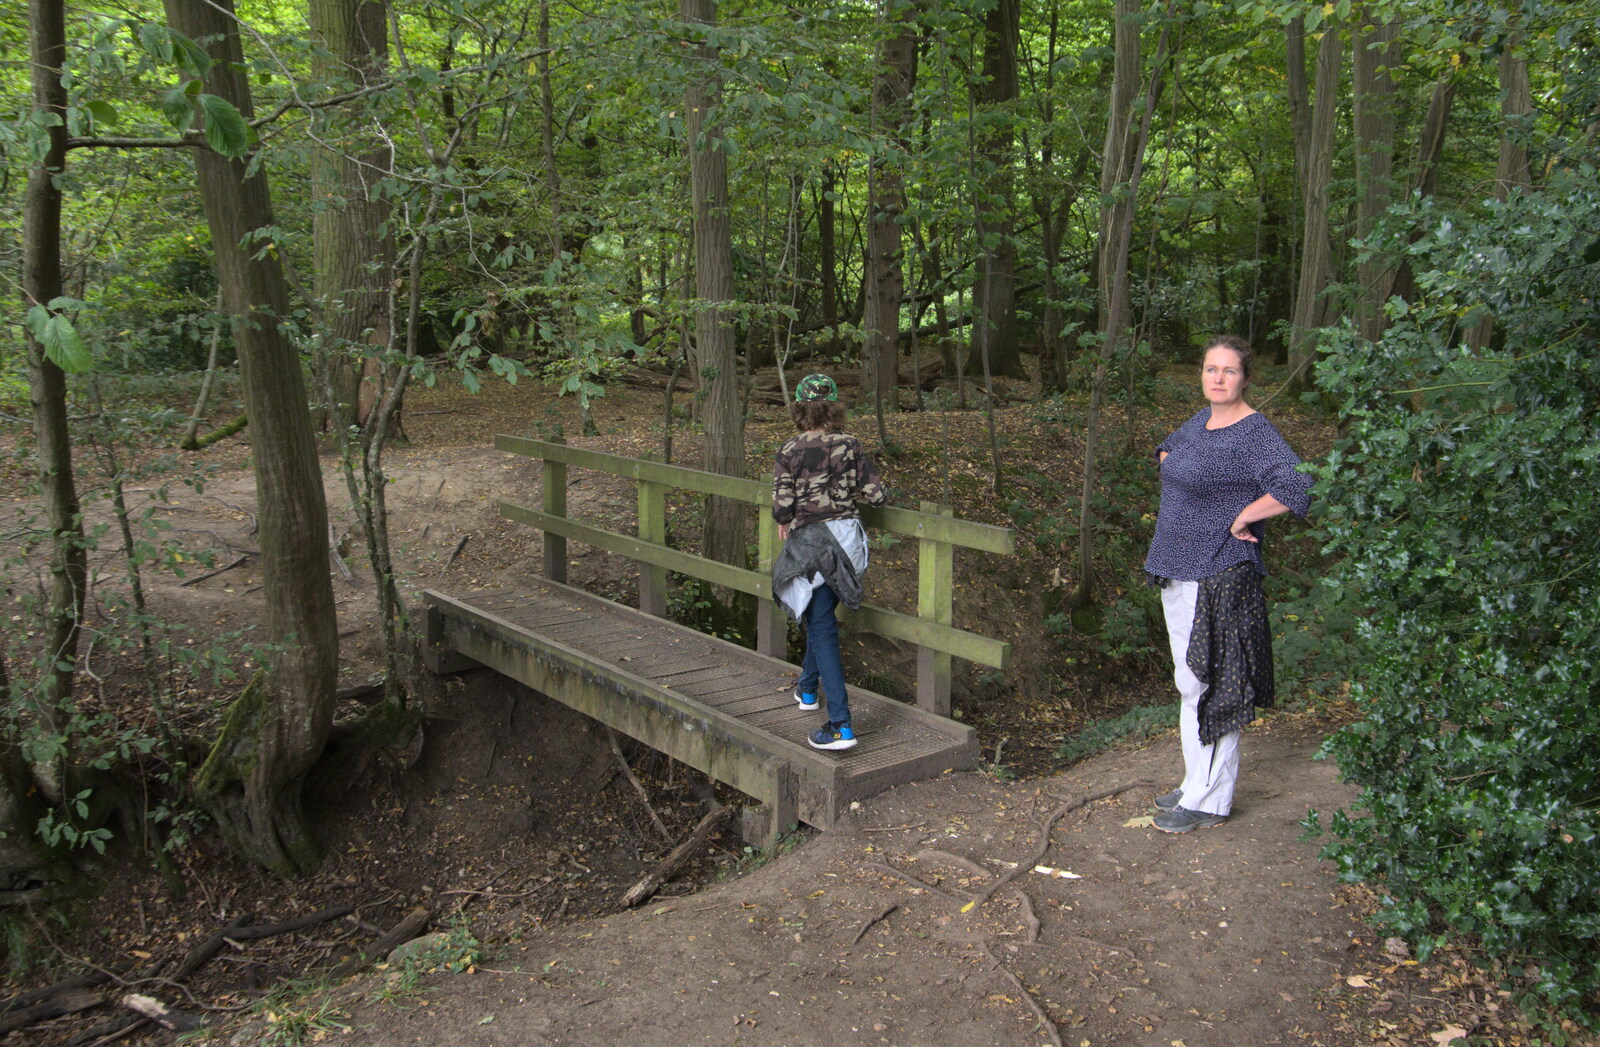 Fred on a small bridge from Jules Visits, and a Trip to Tyrrel's Wood, Pulham Market, Norfolk - 16th August 2020